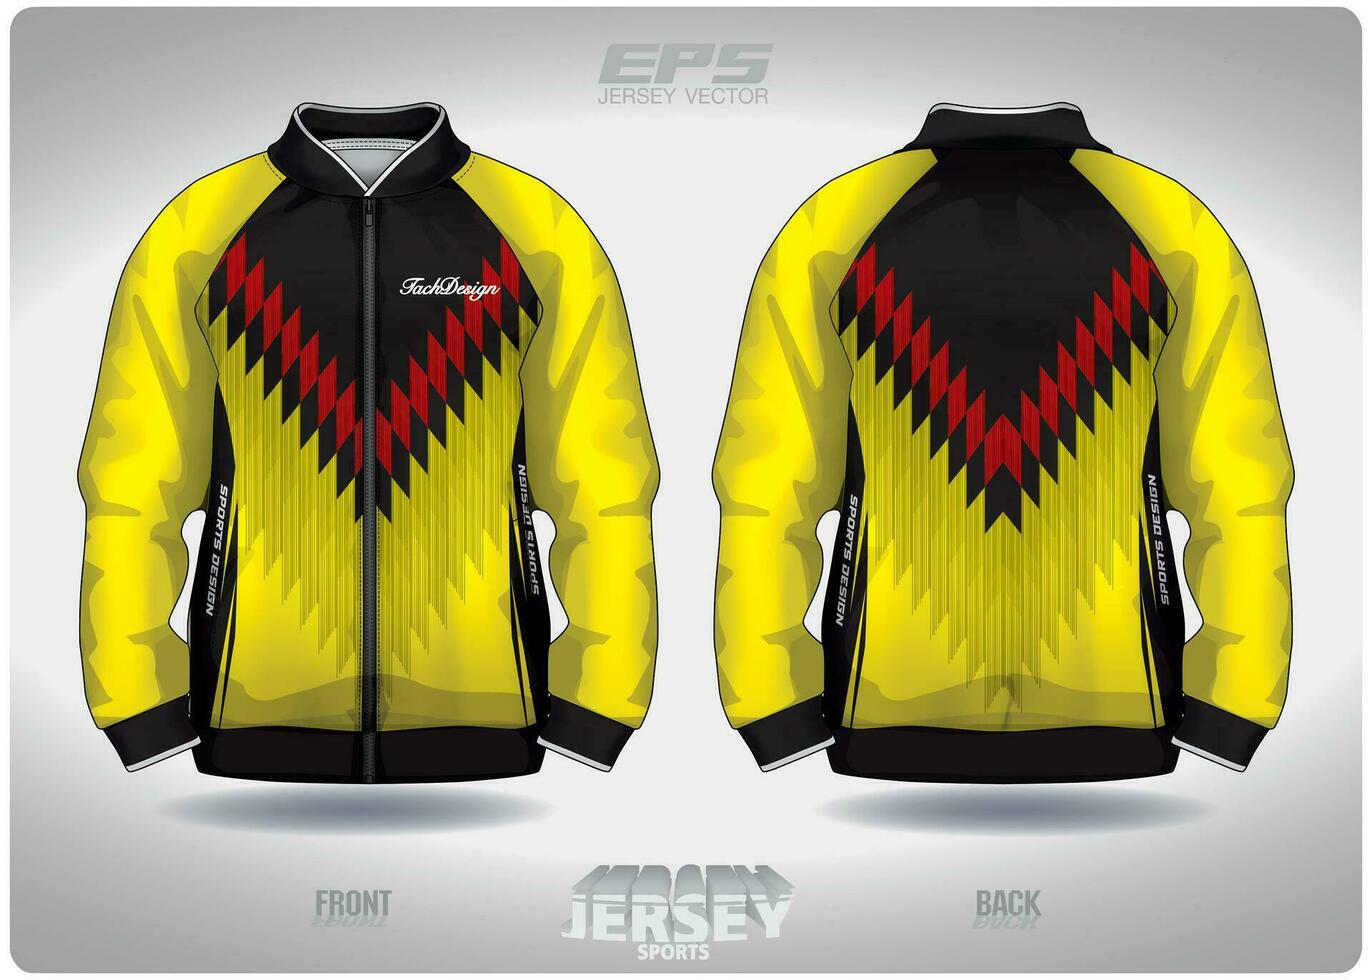 EPS jersey sports shirt vector.Risky wave alternating with zigzags pattern design, illustration, textile background for sports long sleeve sweater vector